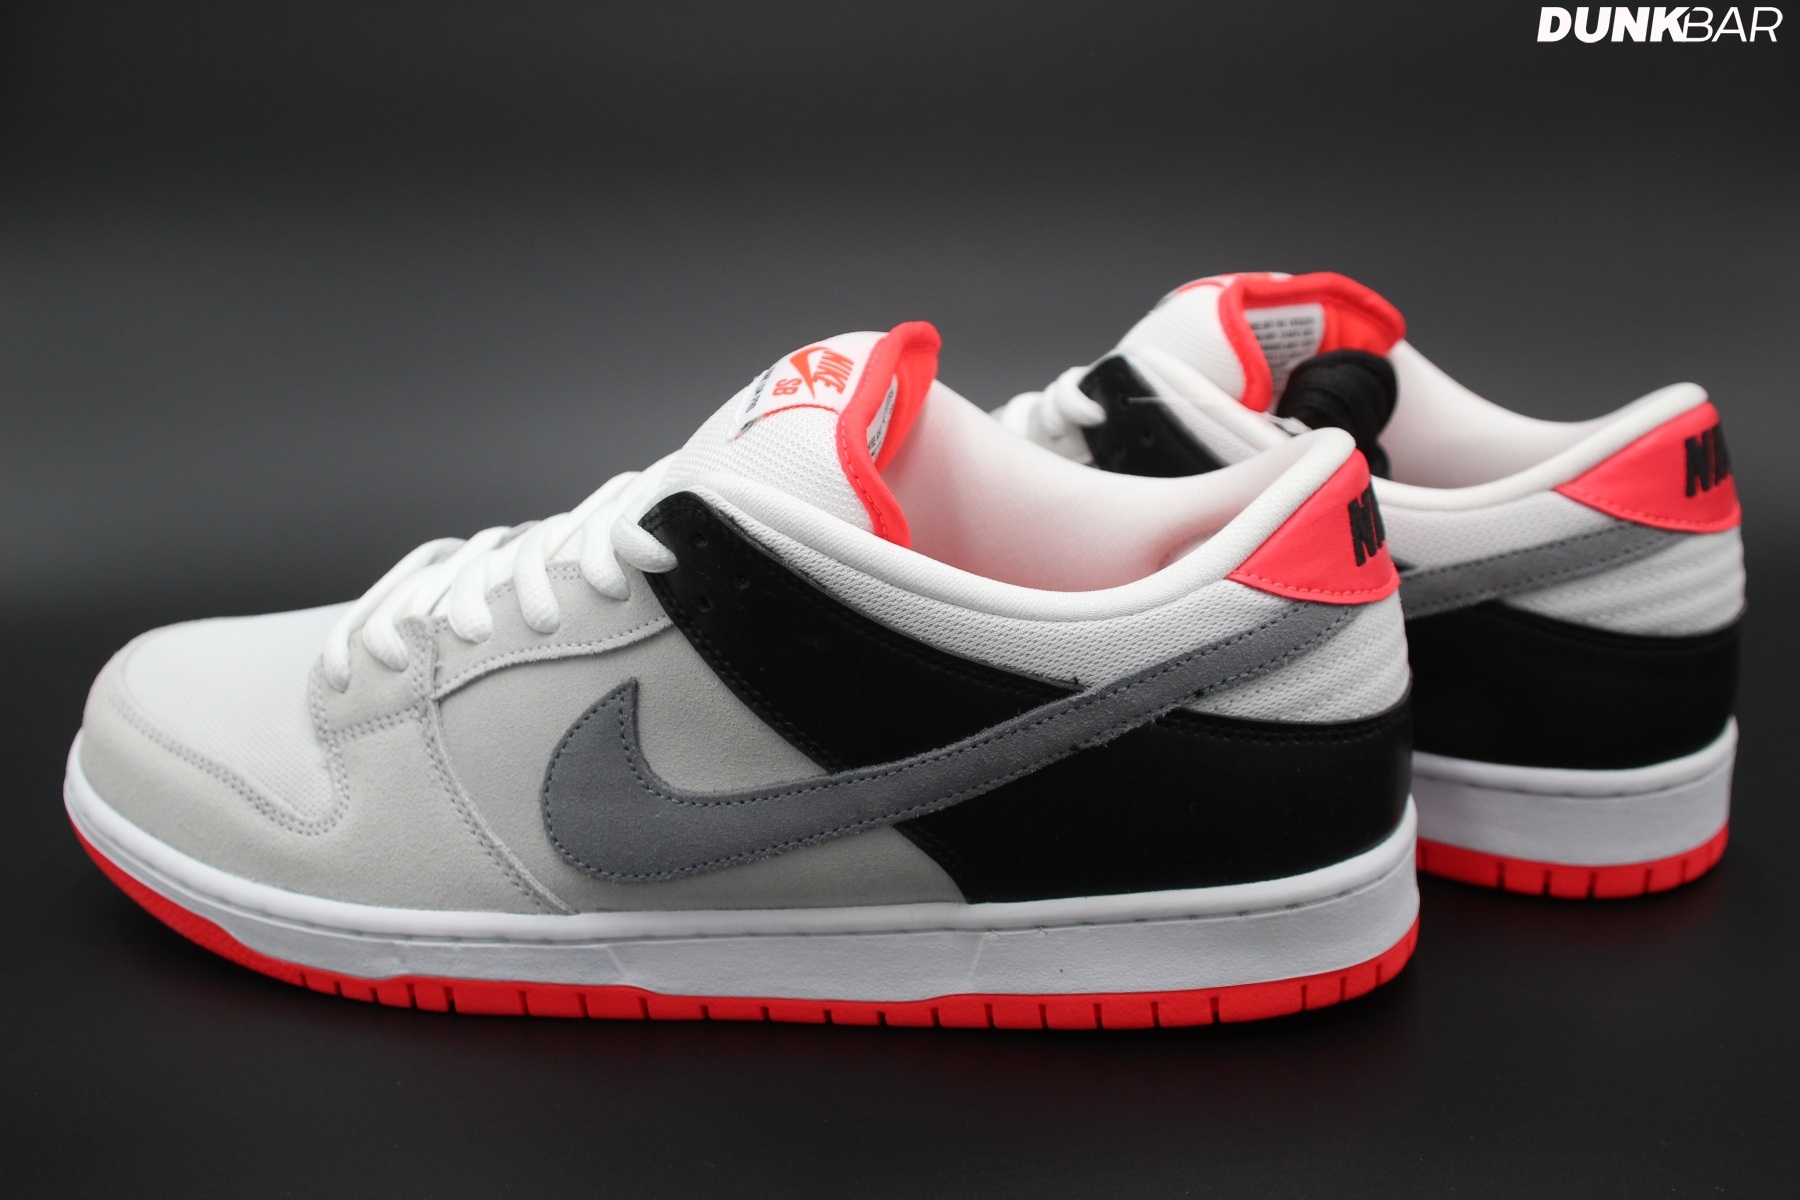 Nike SB Dunk Low – Infrared | Detailed Pictures | Dunkbar